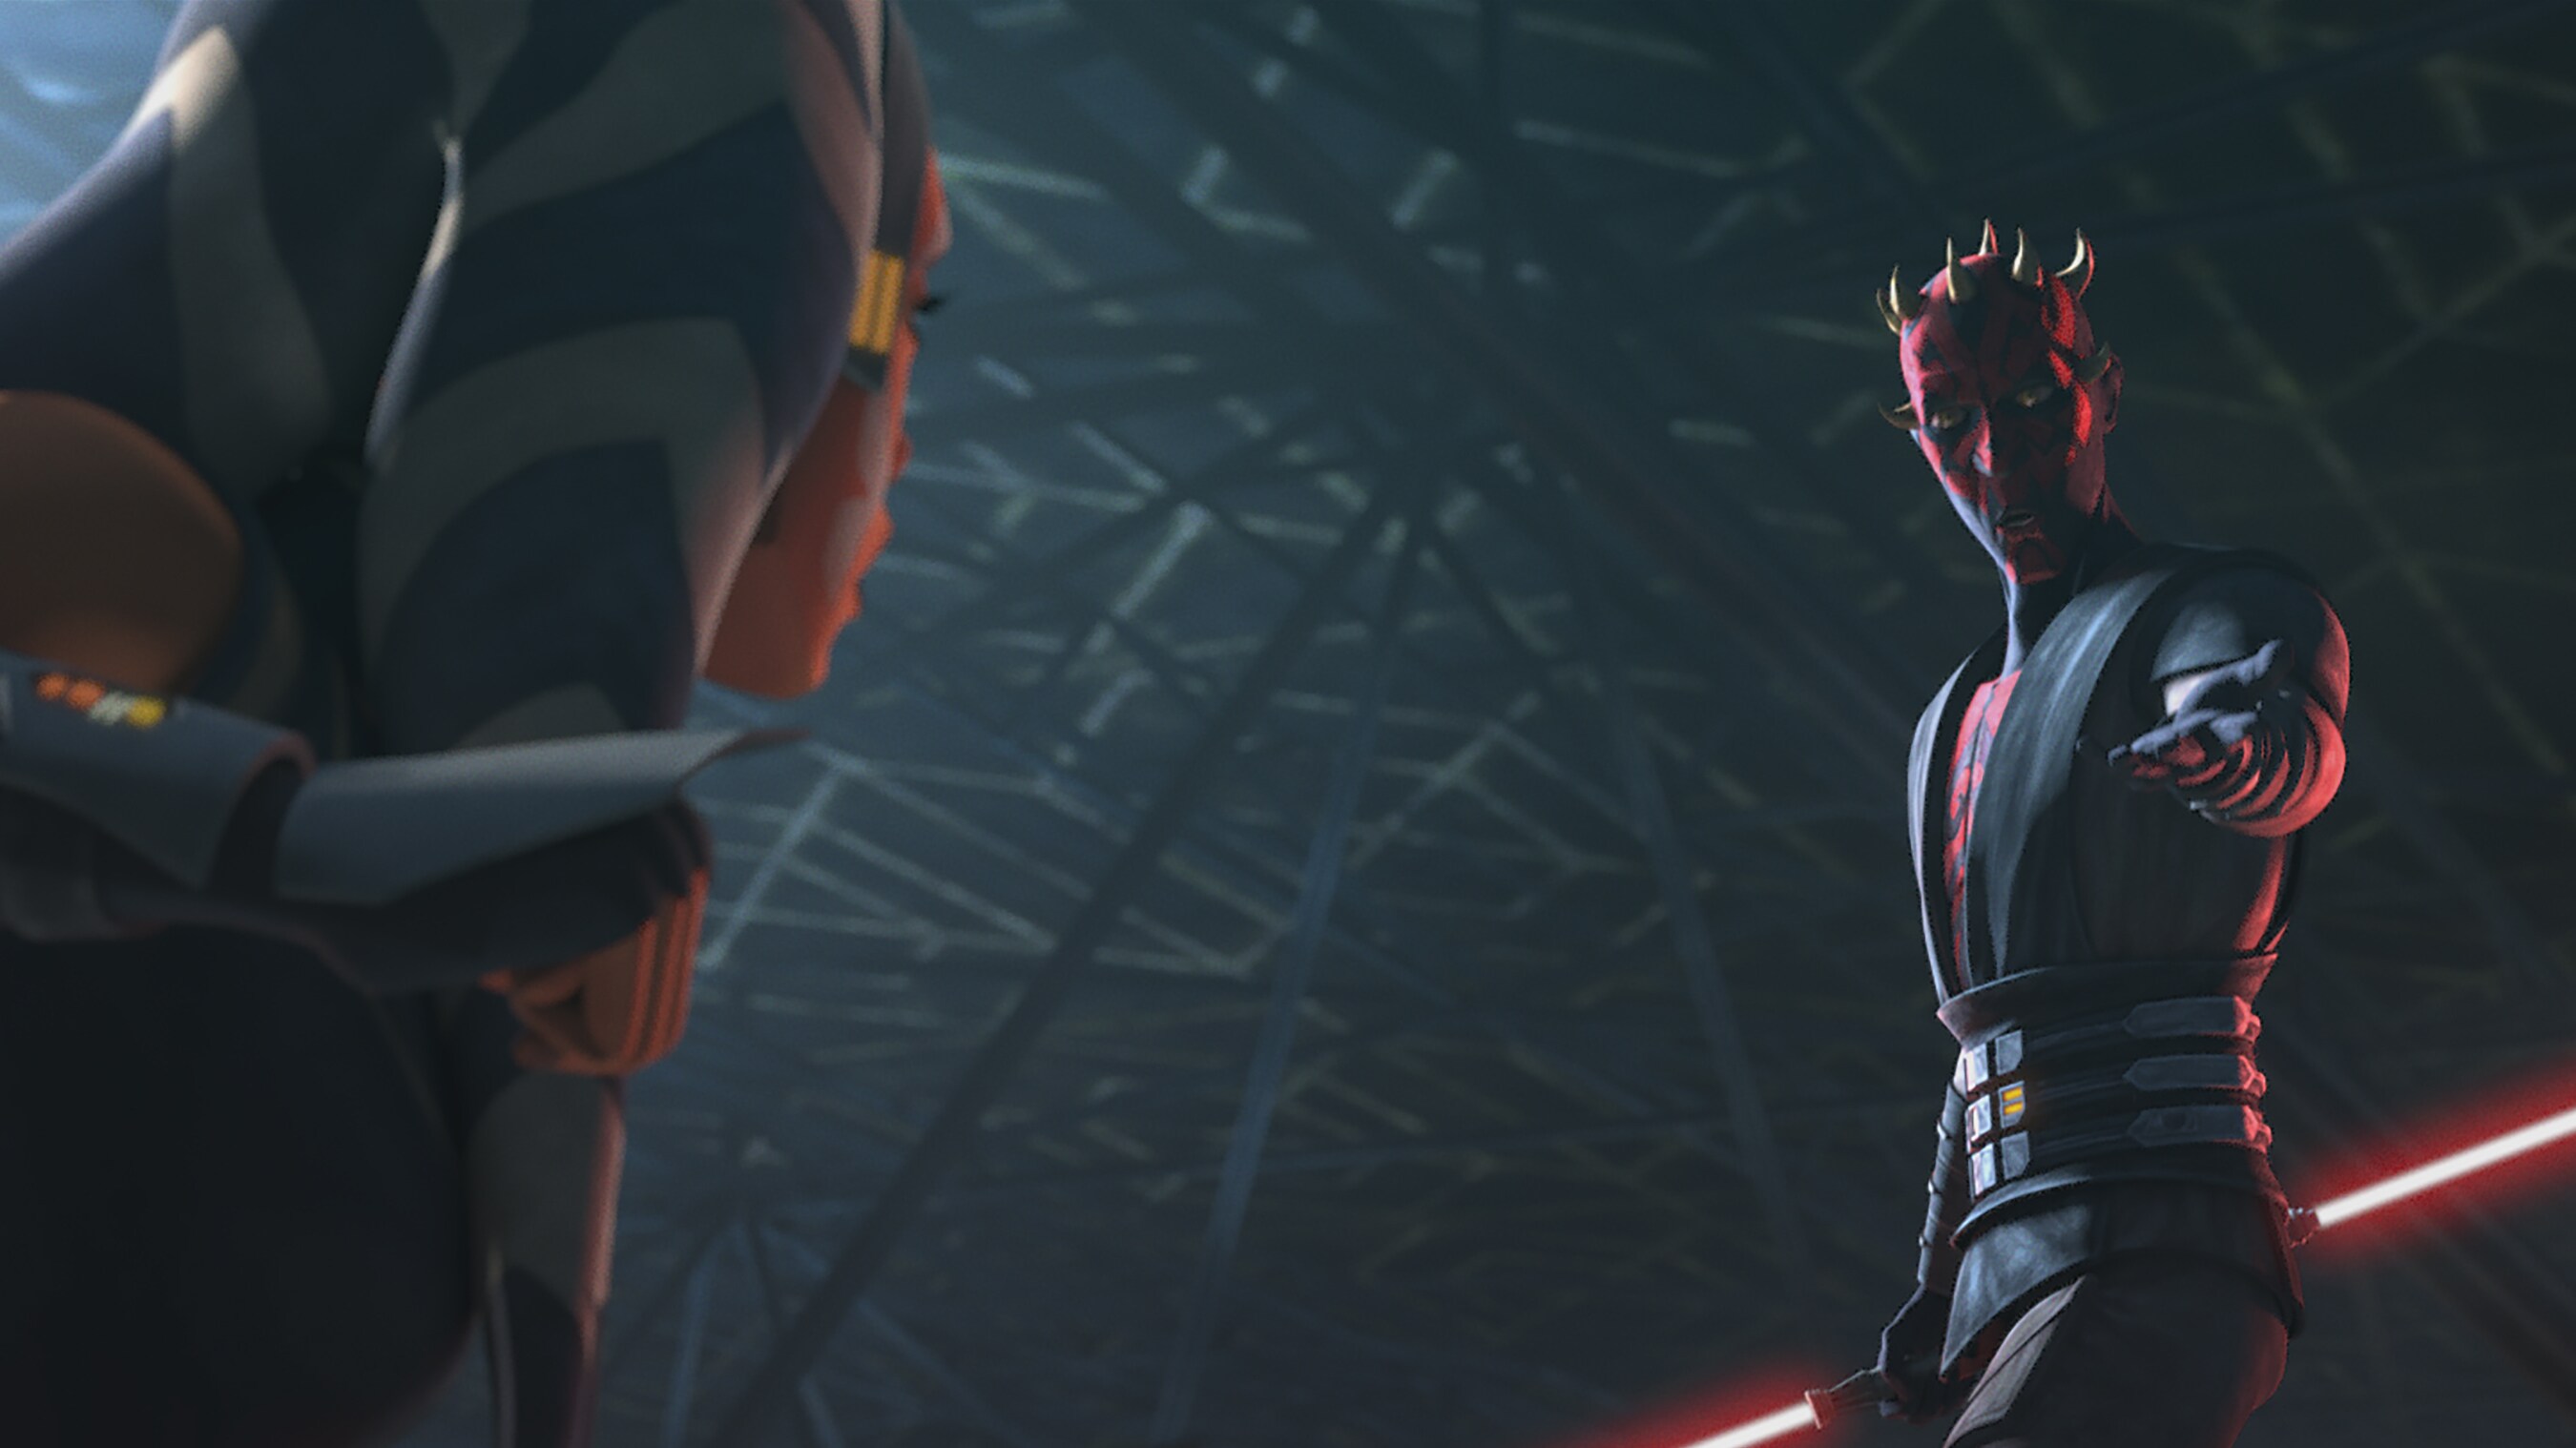 Ahsoka and Maul in STAR WARS: THE CLONE WARS, exclusively on Disney+.